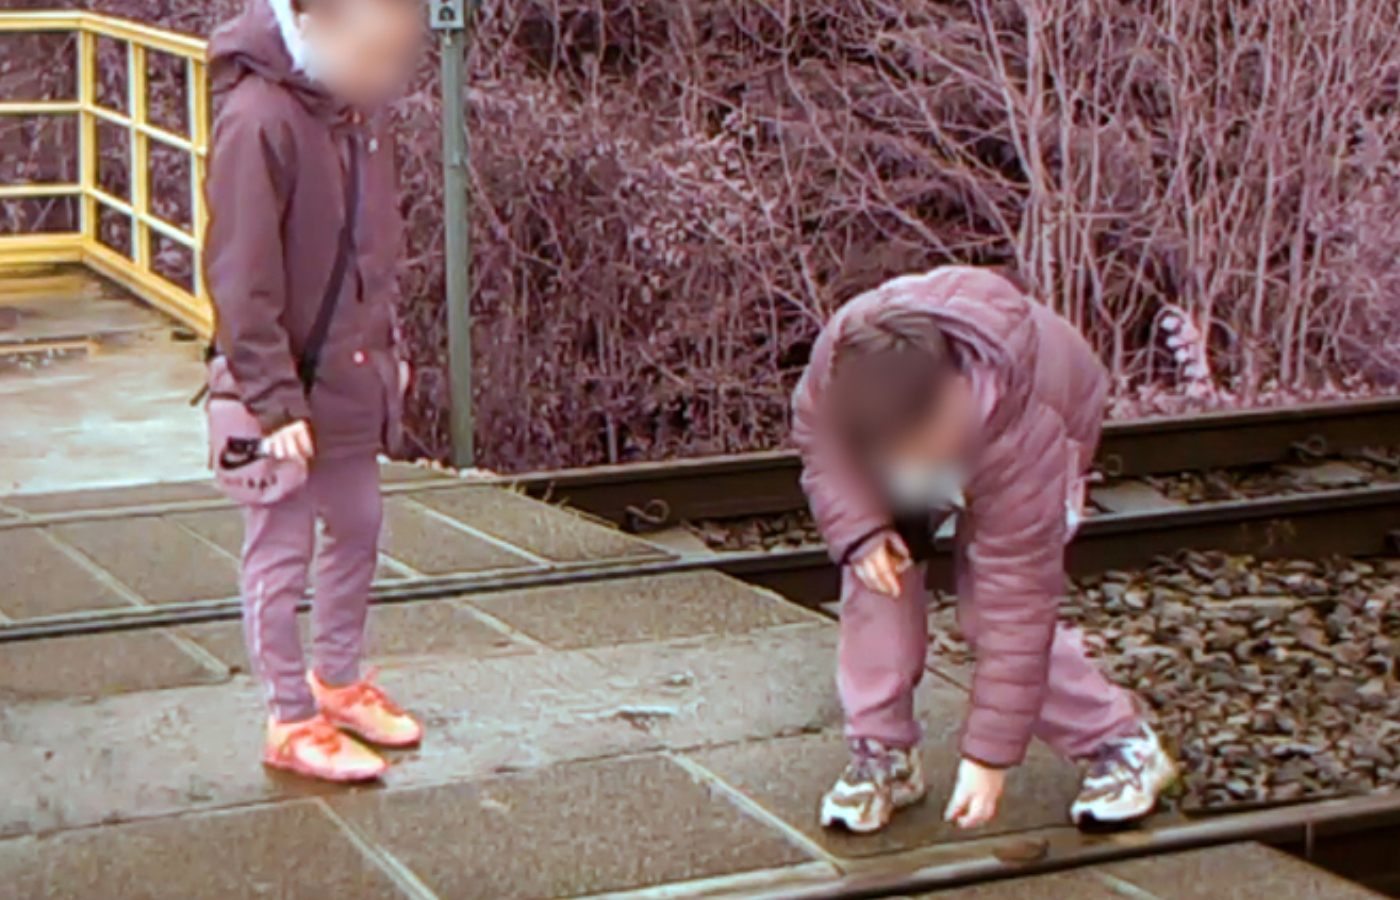 Another clip a shows two boys placing ballast stones on the lines.